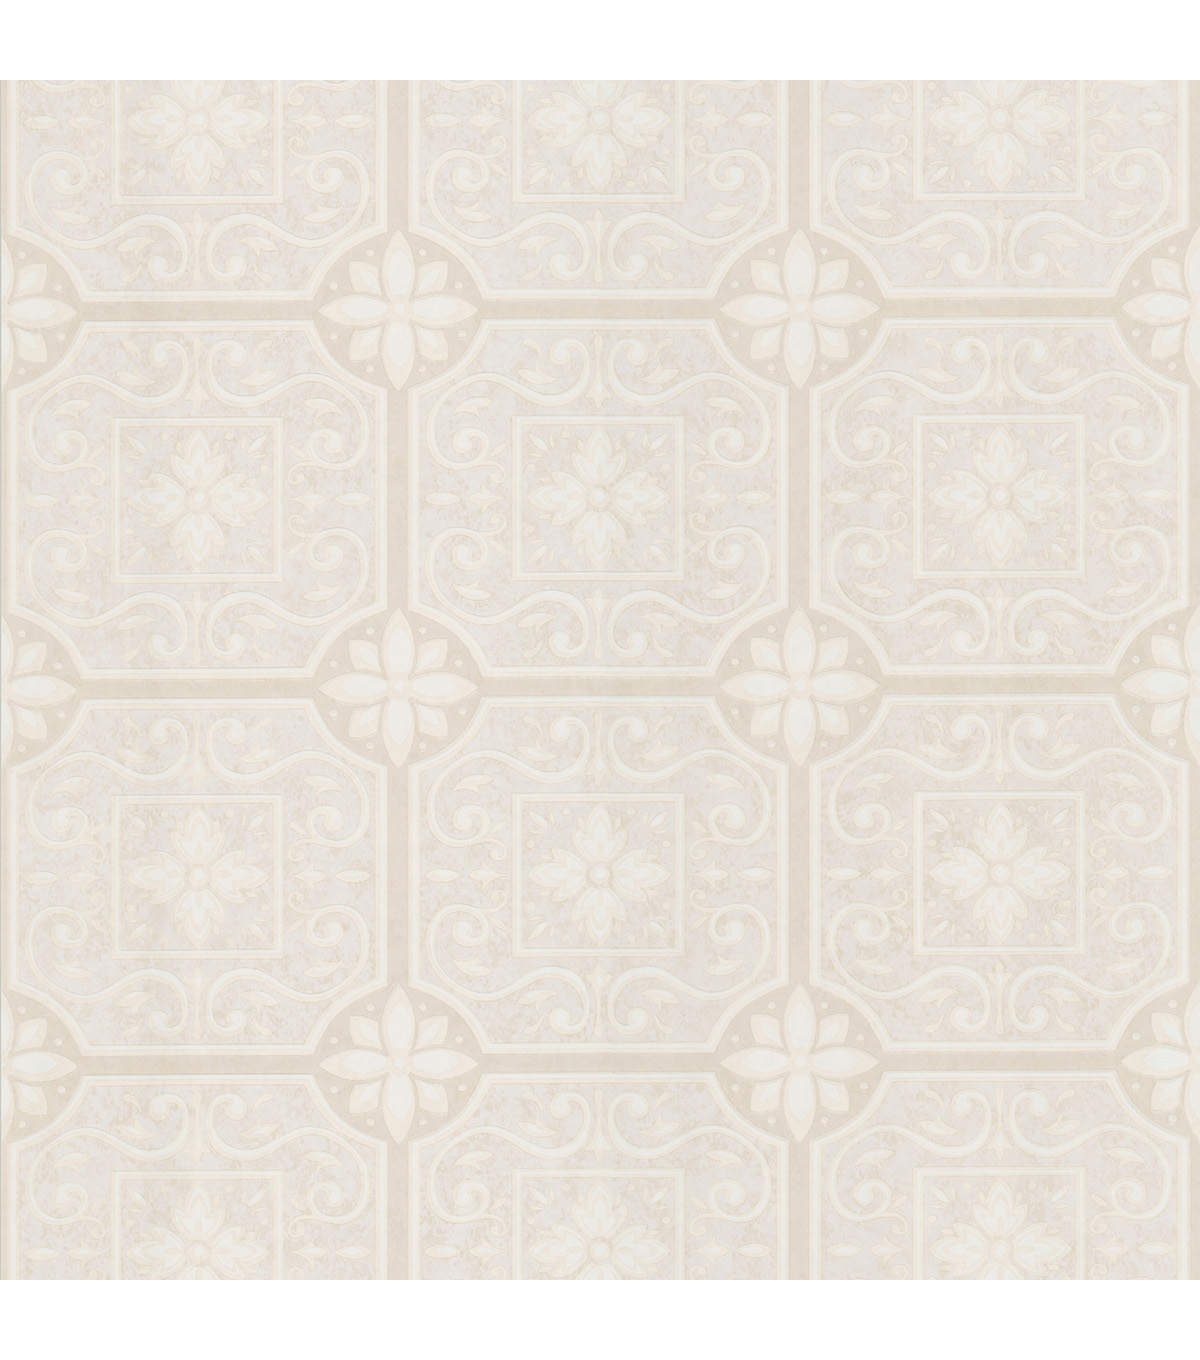 Free Download Tin Ceiling Tiles Wallpaper Samplevictorianne